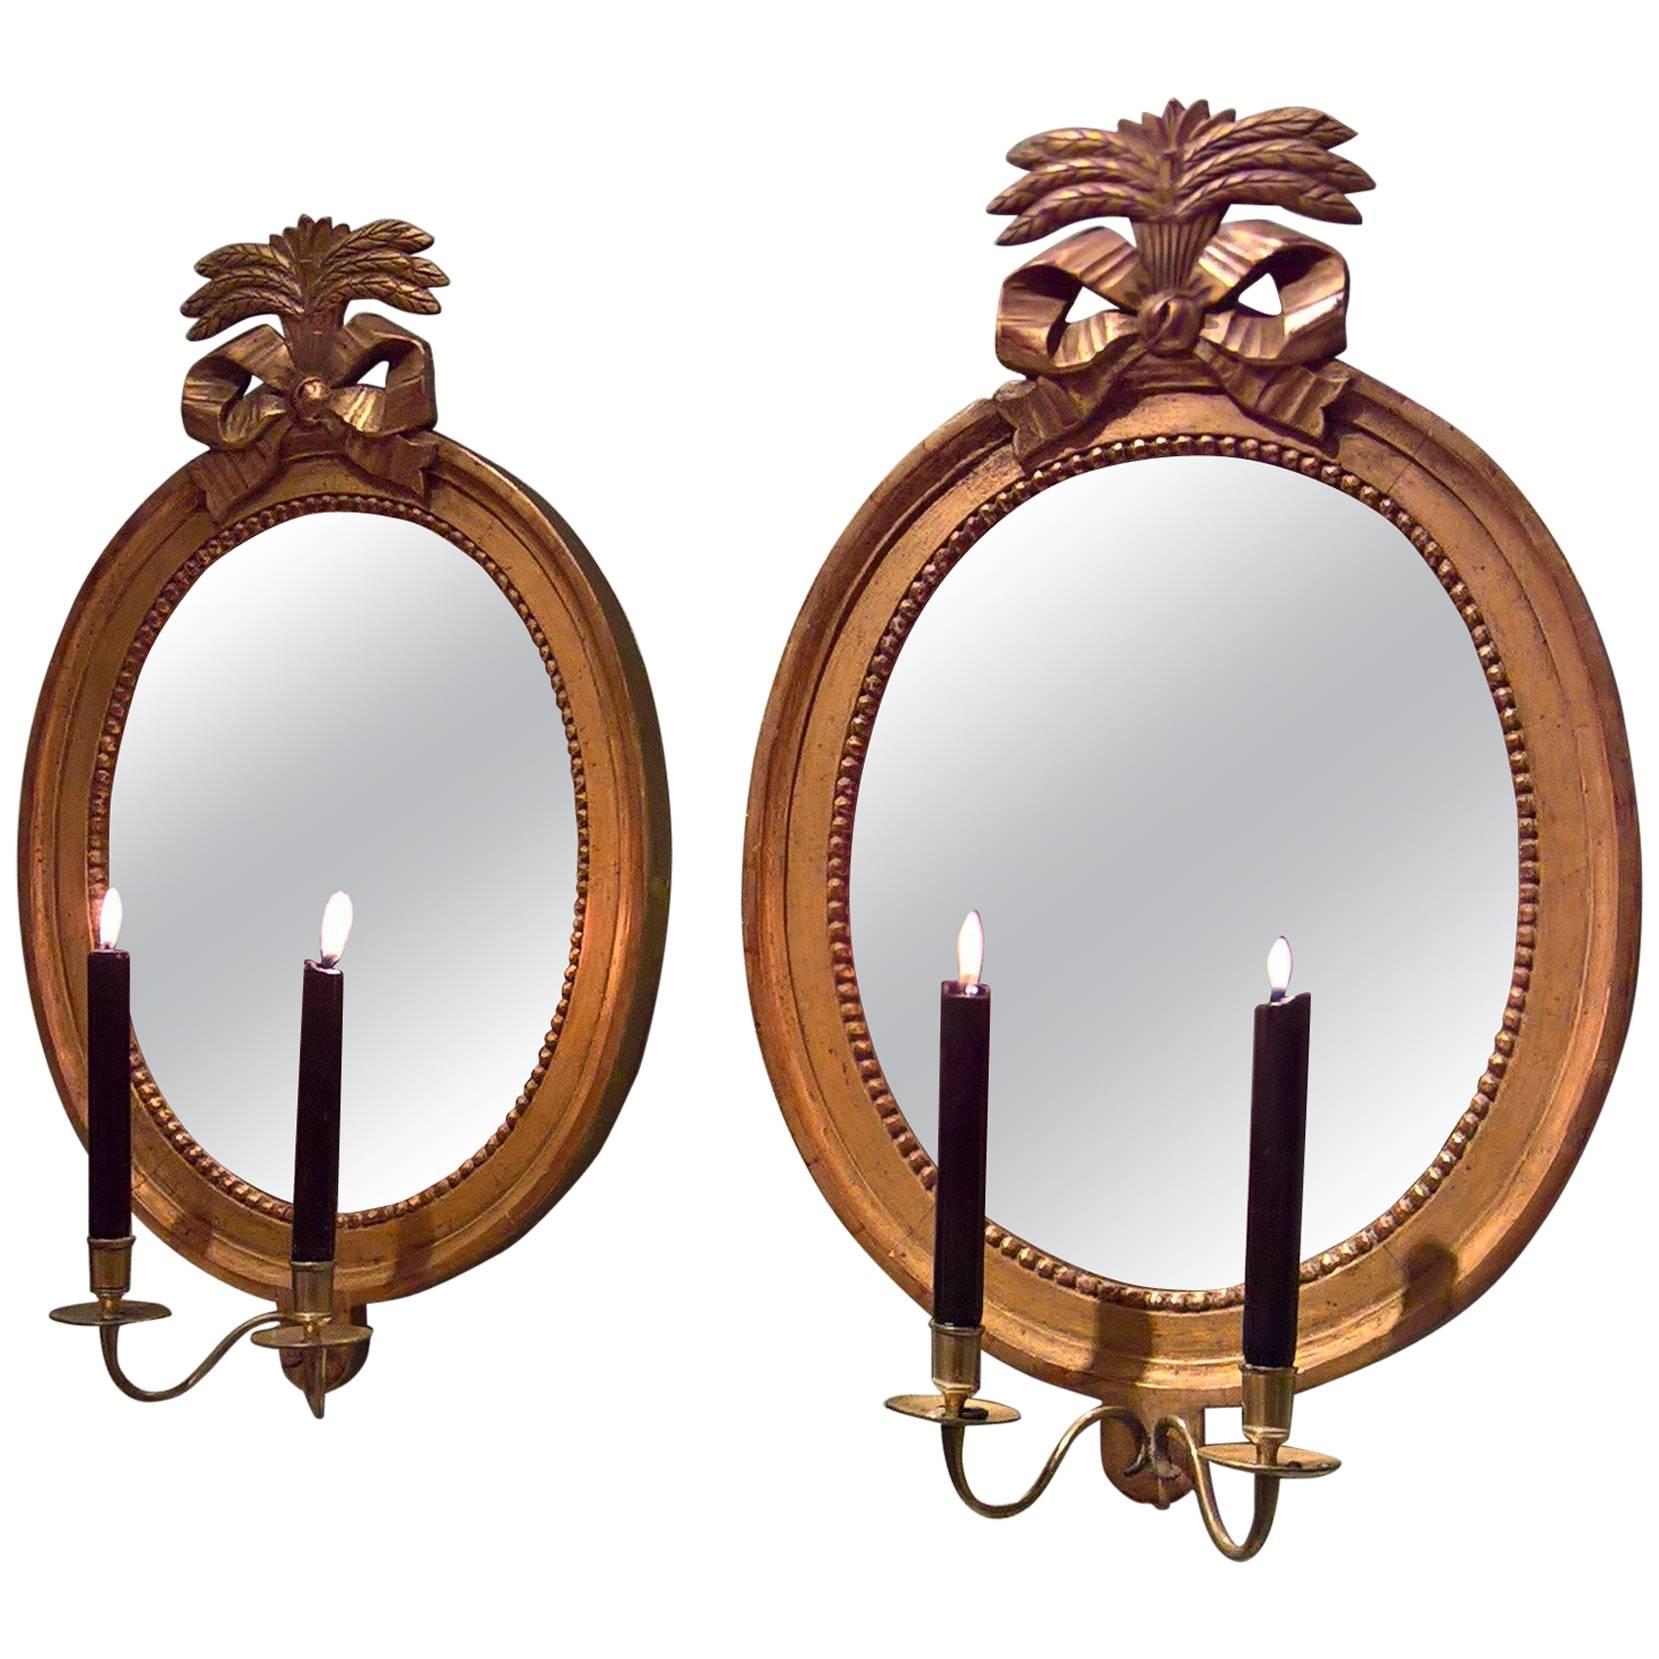 Late 18th Century Gustavian Pair of Giltwood Mirrors